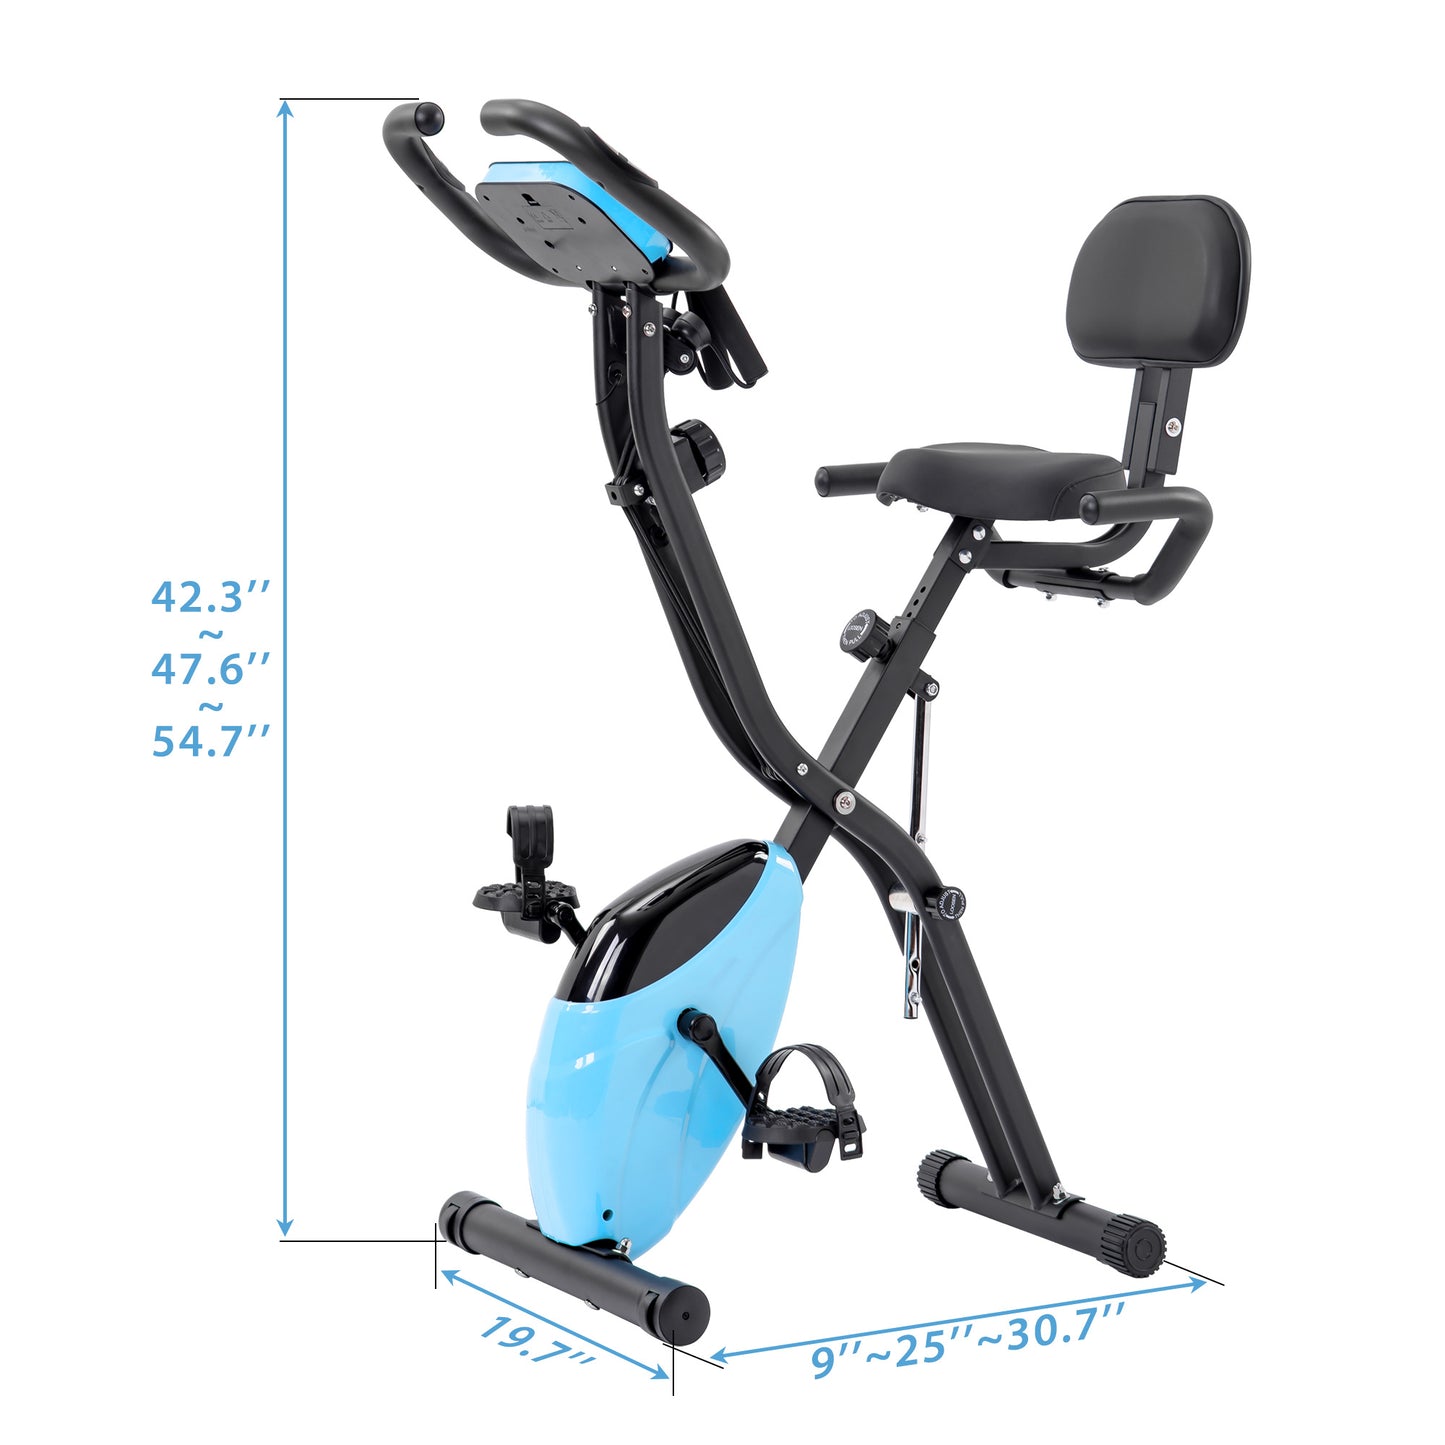 Folding Exercise Bike, Fitness Upright and Recumbent X-Bike with 10-Level Adjustable Resistance, Arm Bands and Backrest